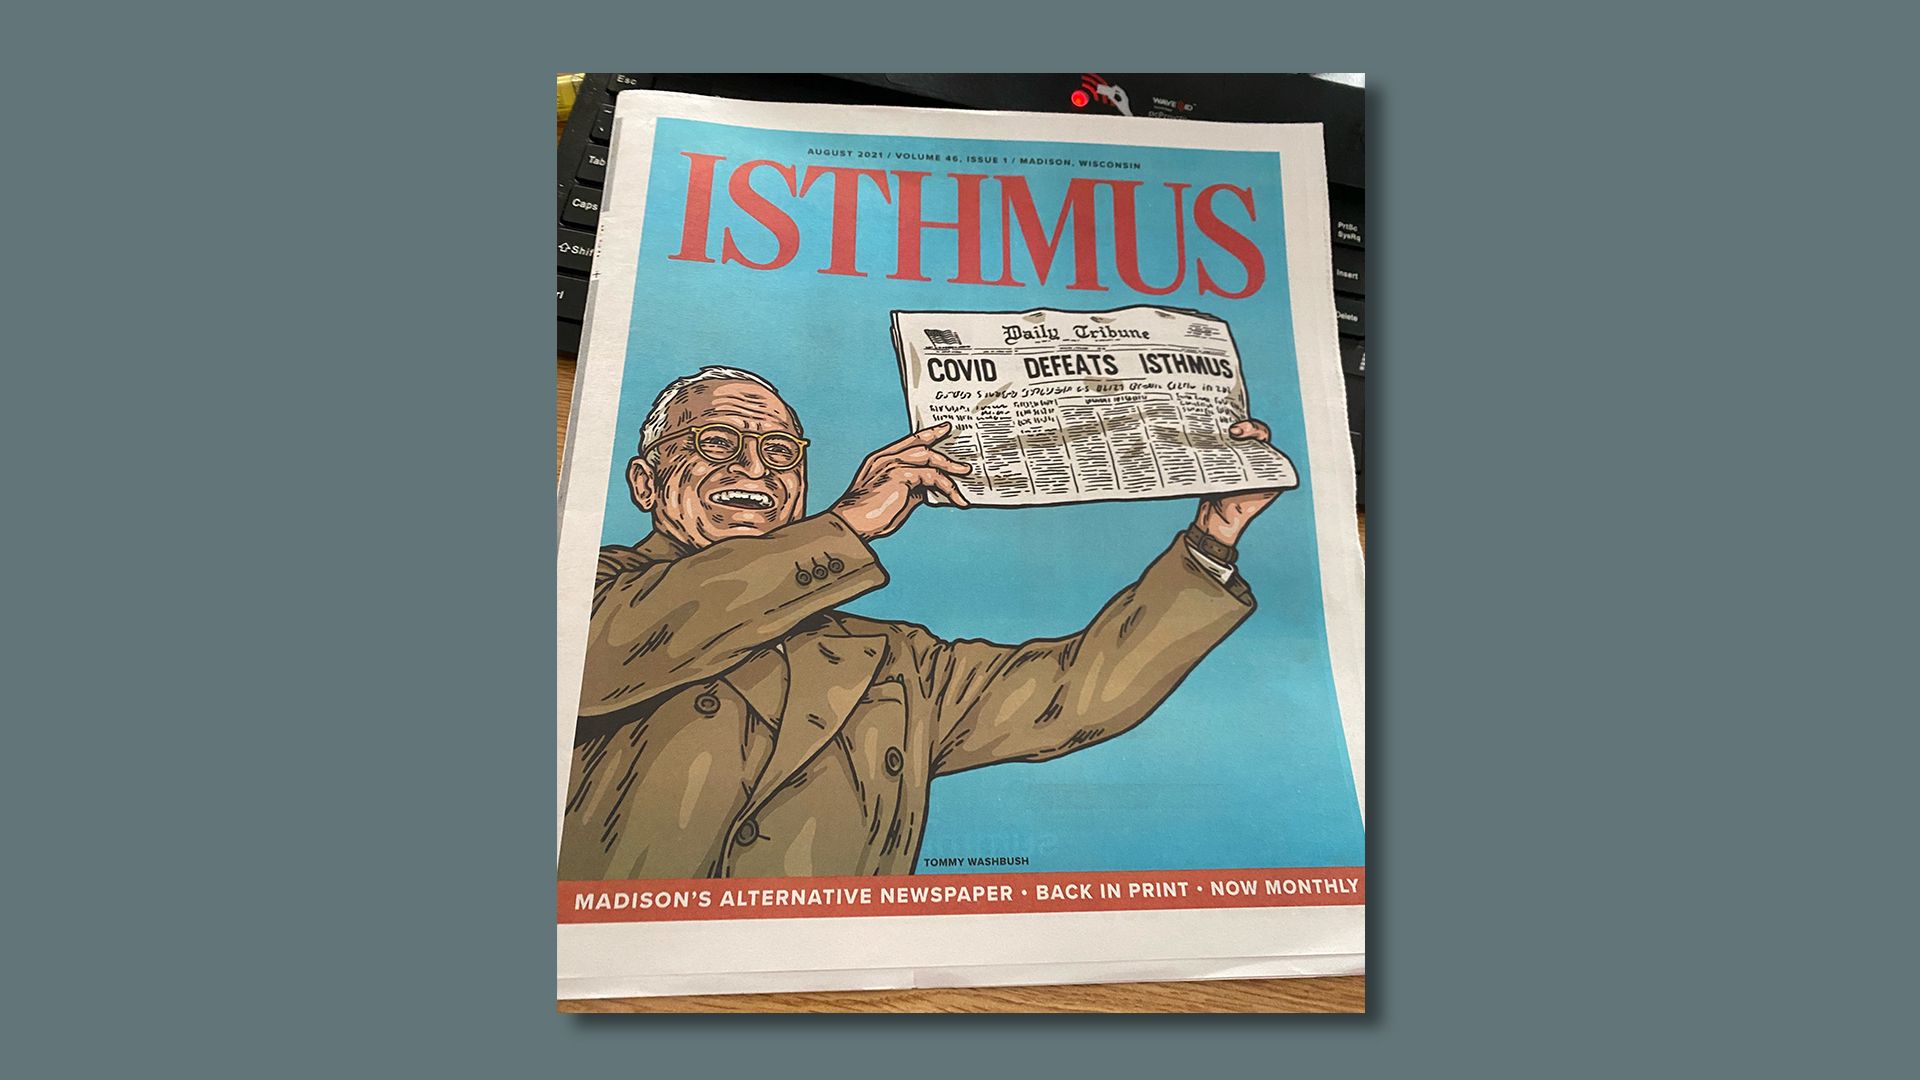 A paper copy of The Isthmus, an alternative newspaper in Madison, Wisconsin that went digital-only and just came back in print.